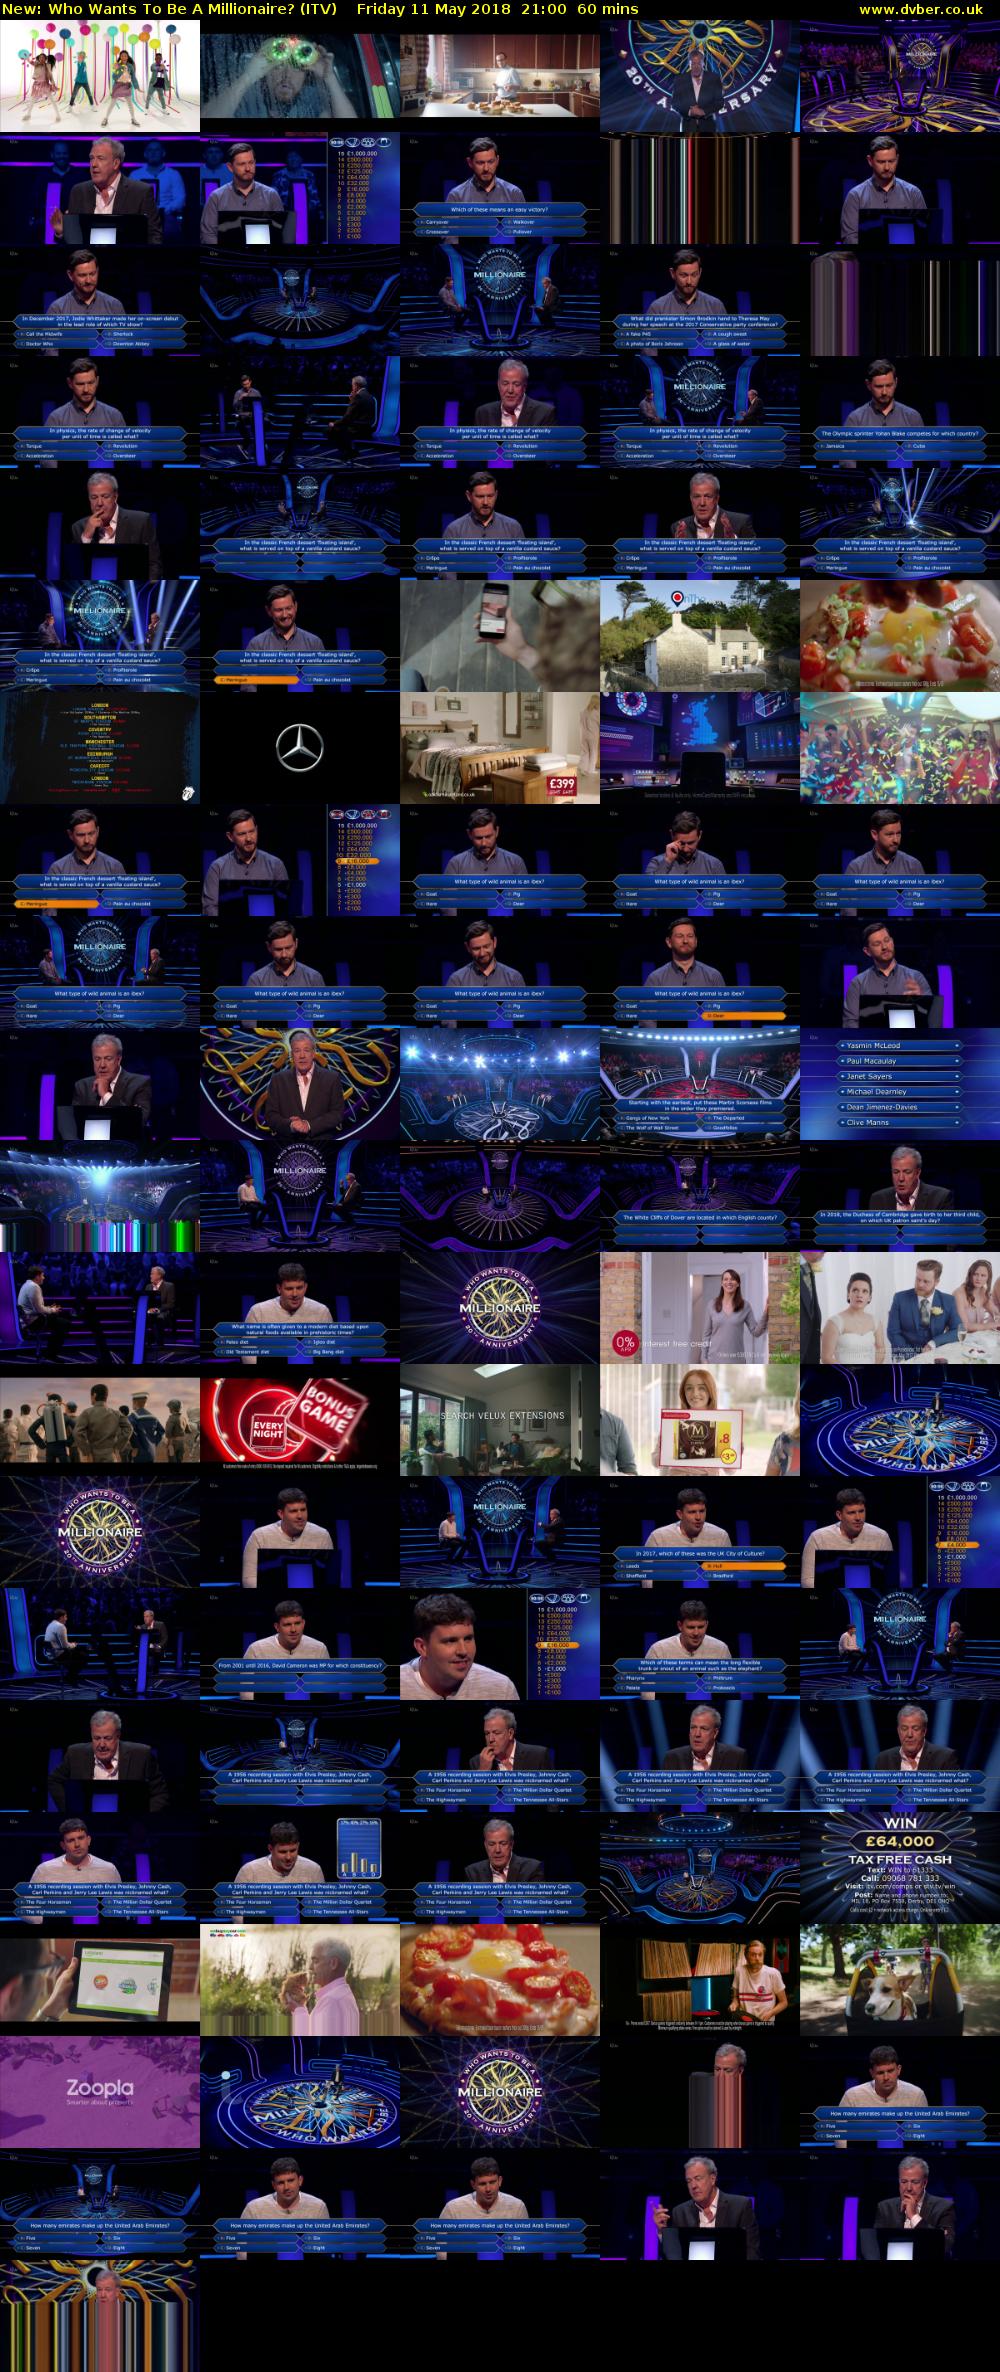 Who Wants To Be A Millionaire? (ITV) Friday 11 May 2018 21:00 - 22:00